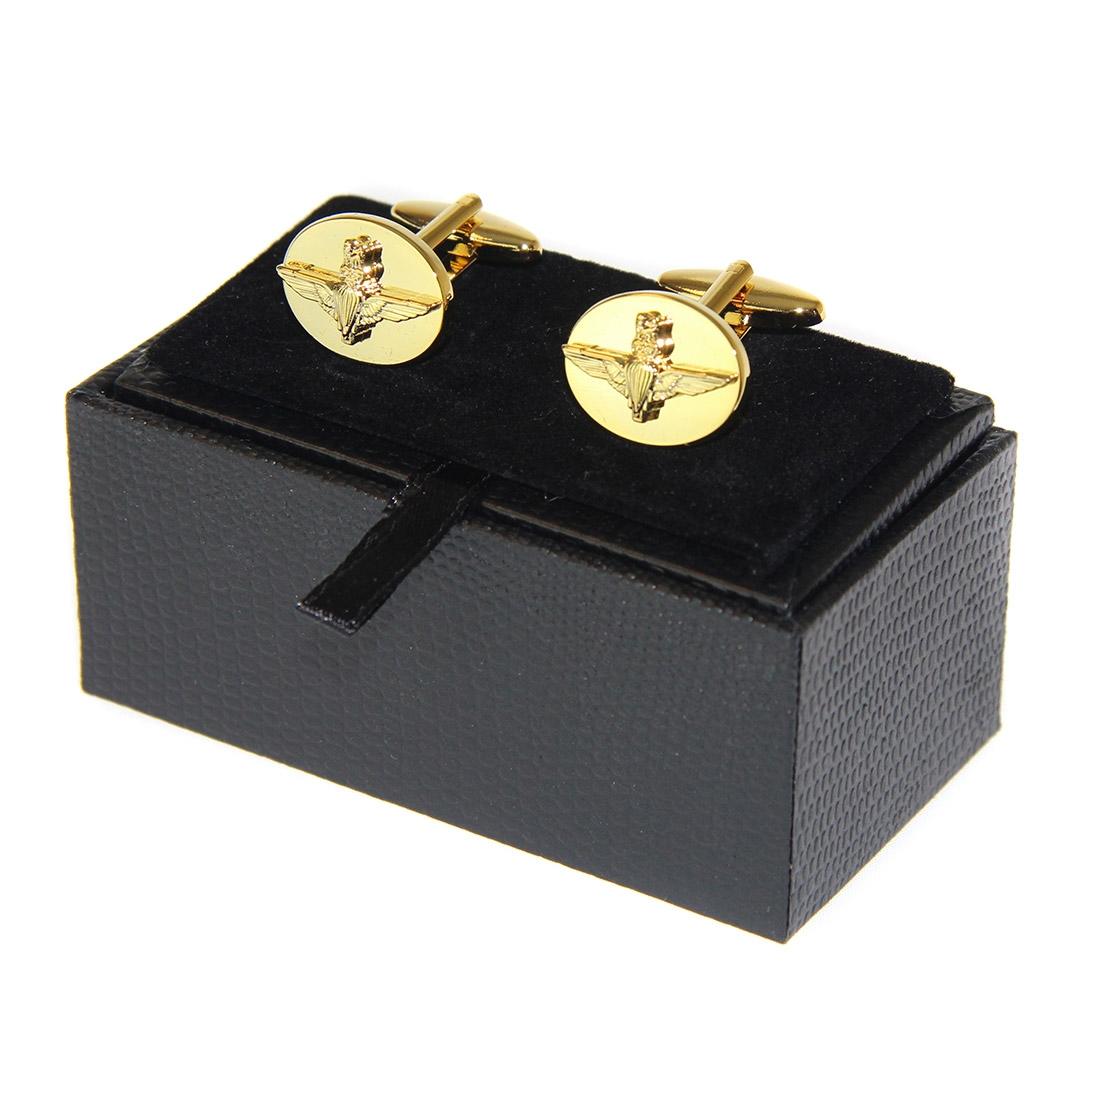 Oval Embossed Cufflinks (Gilt Plated) - The Airborne Shop